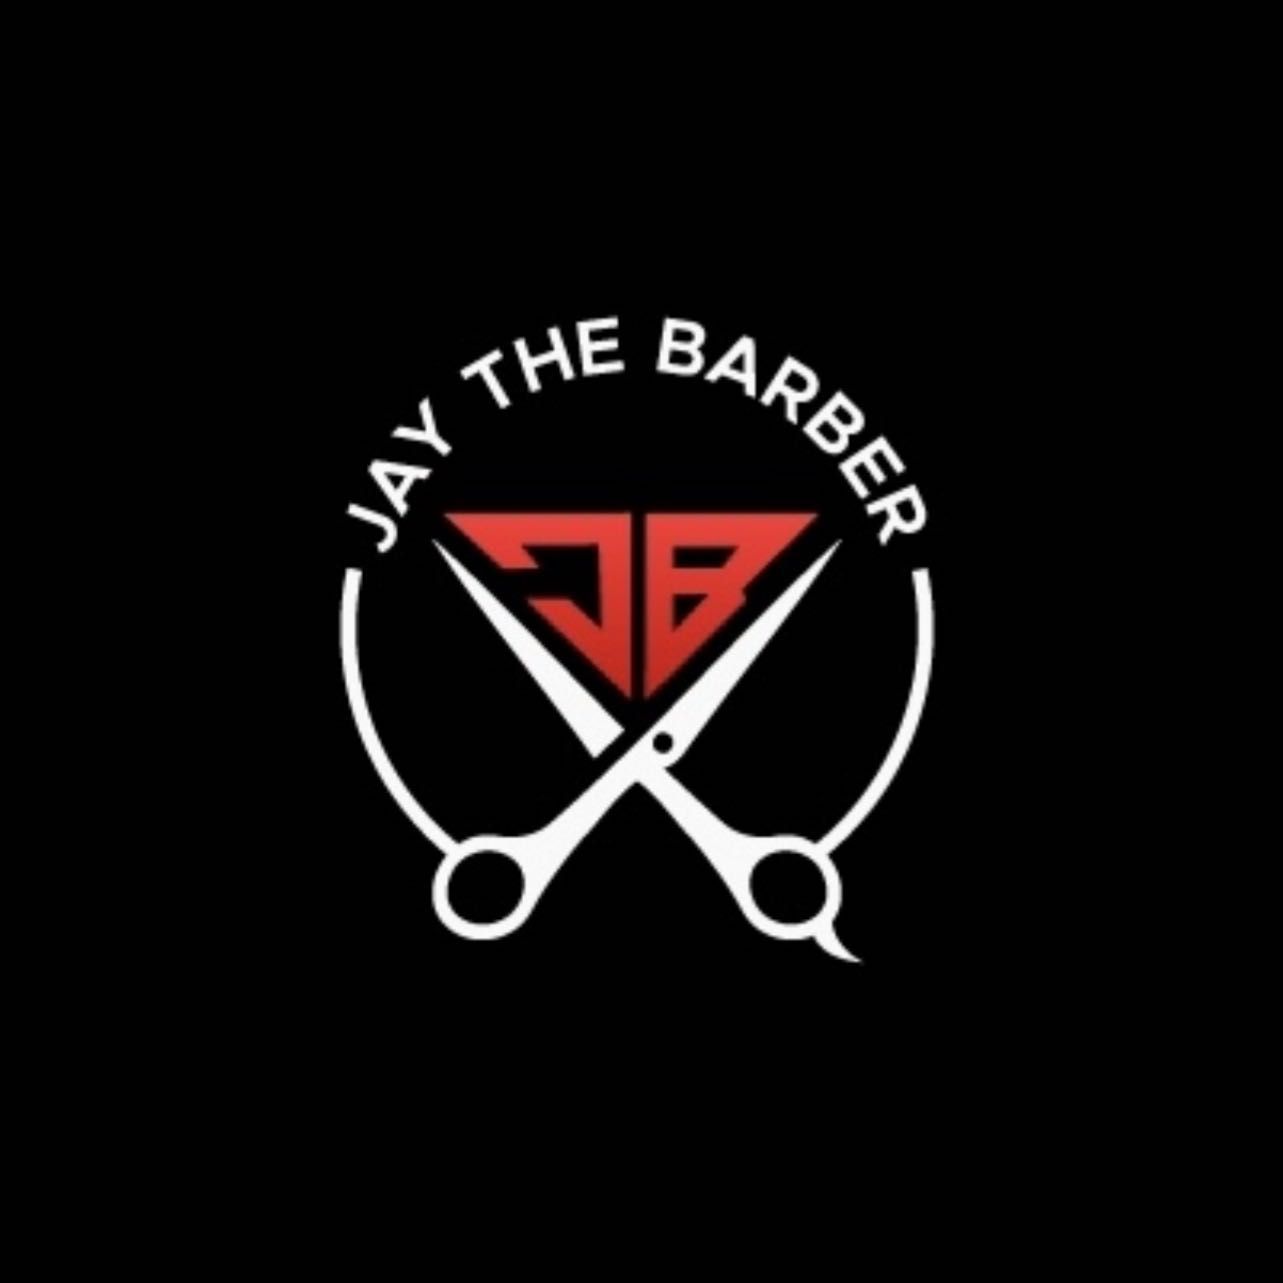 Jay The Barber • Prices, Hours, Reviews etc.